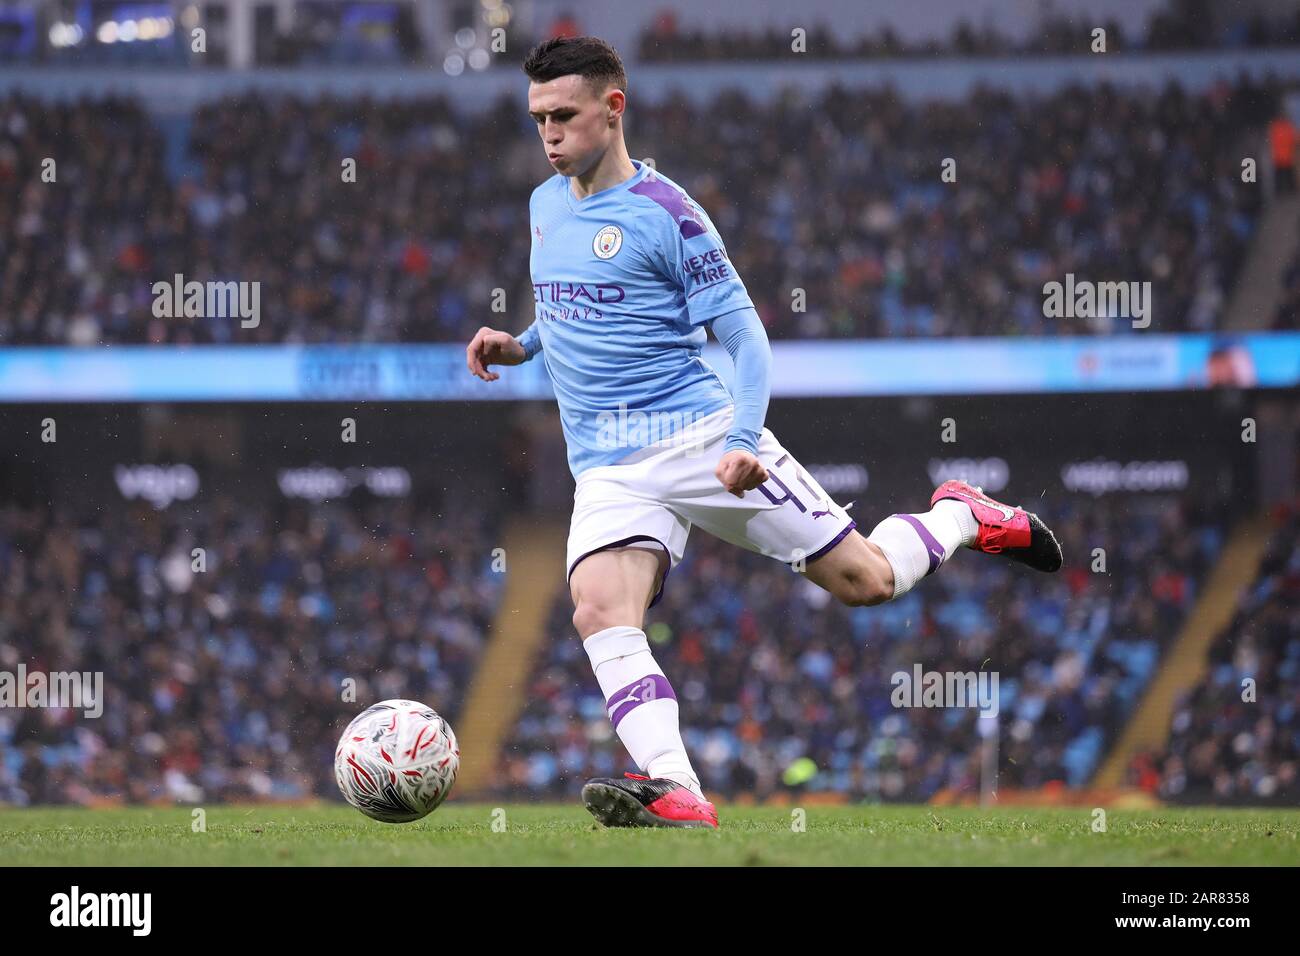 Manchester, UK. 26th Jan 2020.  Manchester City's Phil Foden in action during the FA Cup match between Manchester City and Fulham at the Etihad Stadium, Manchester on Sunday 26th January 2020. (Credit: Tim Markland | MI News) Photograph may only be used for newspaper and/or magazine editorial purposes, license required for commercial use Credit: MI News & Sport /Alamy Live News Stock Photo